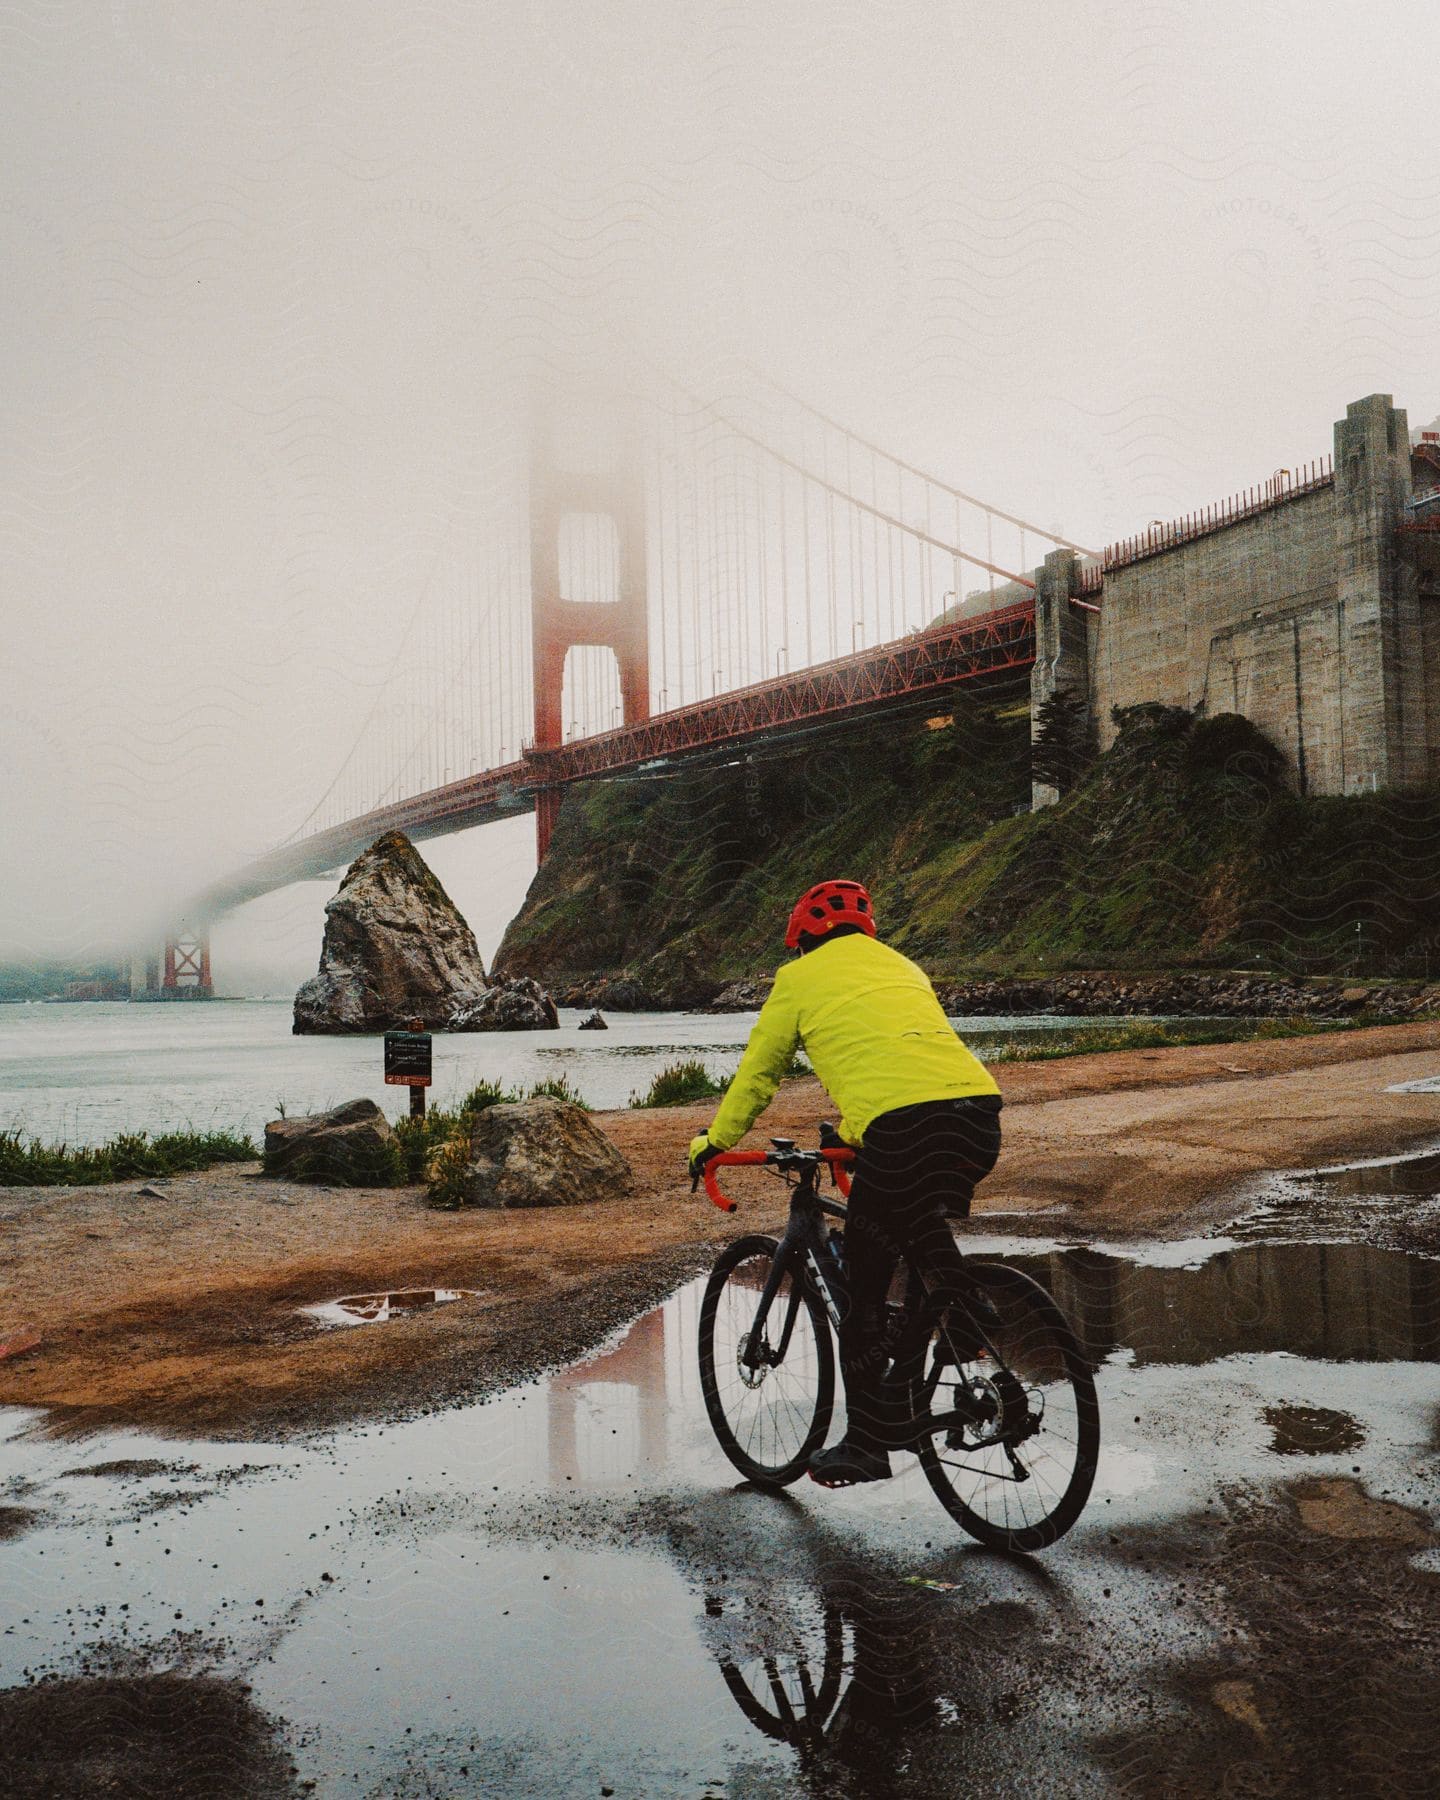 A man in a bicycle with a yellow jacket starring at the coast of the sea and the Golden Gate bridge.